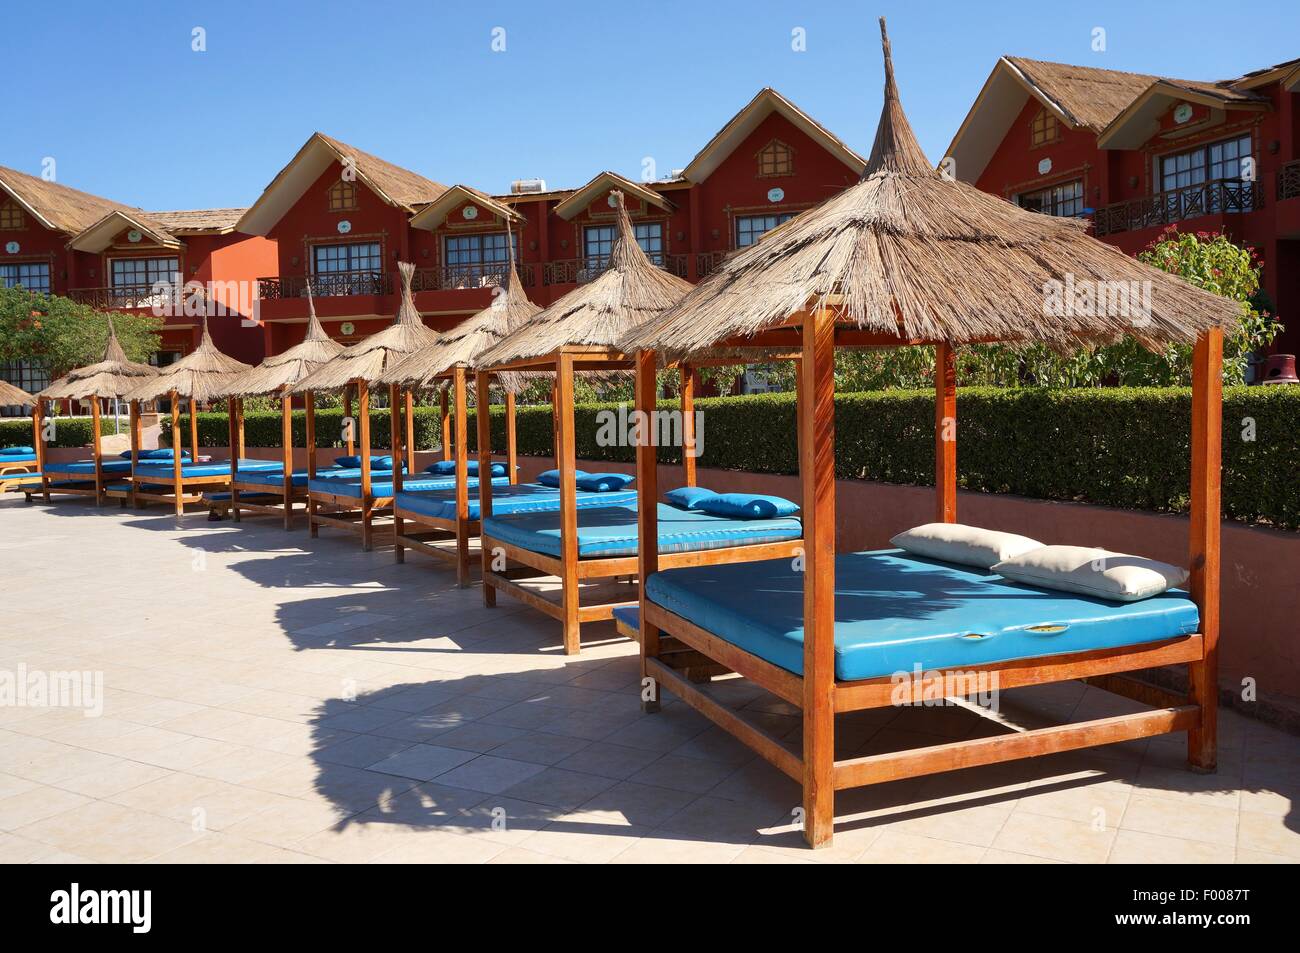 Typical Sun Beds in a Holiday Resort Stock Photo